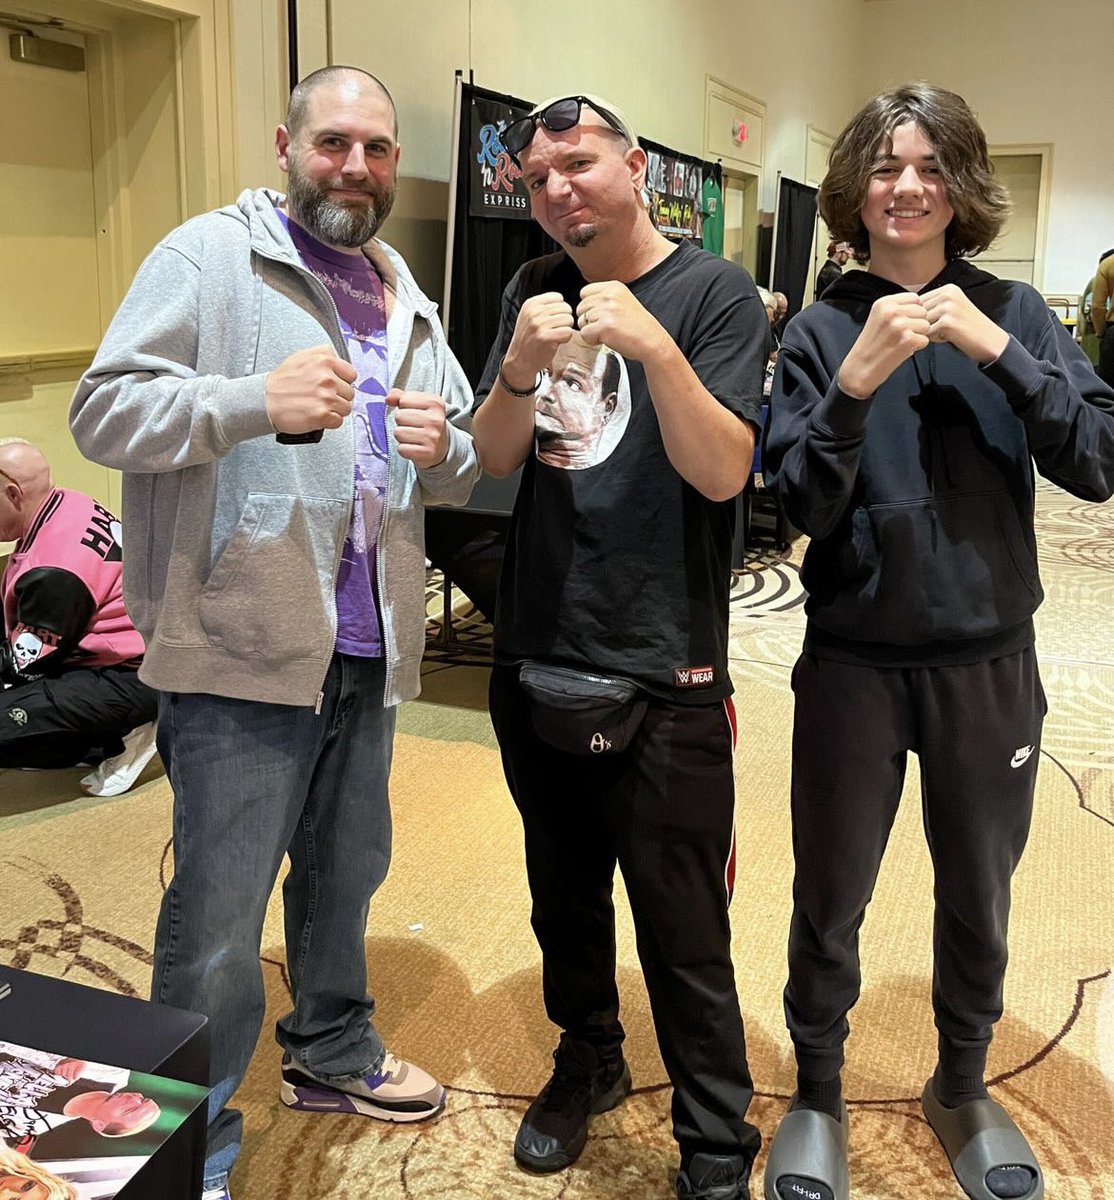 Enjoyed meeting #Wrestling fans at #wrestlecon this past #WrestleManiaXL weekend . #WrestleMania .